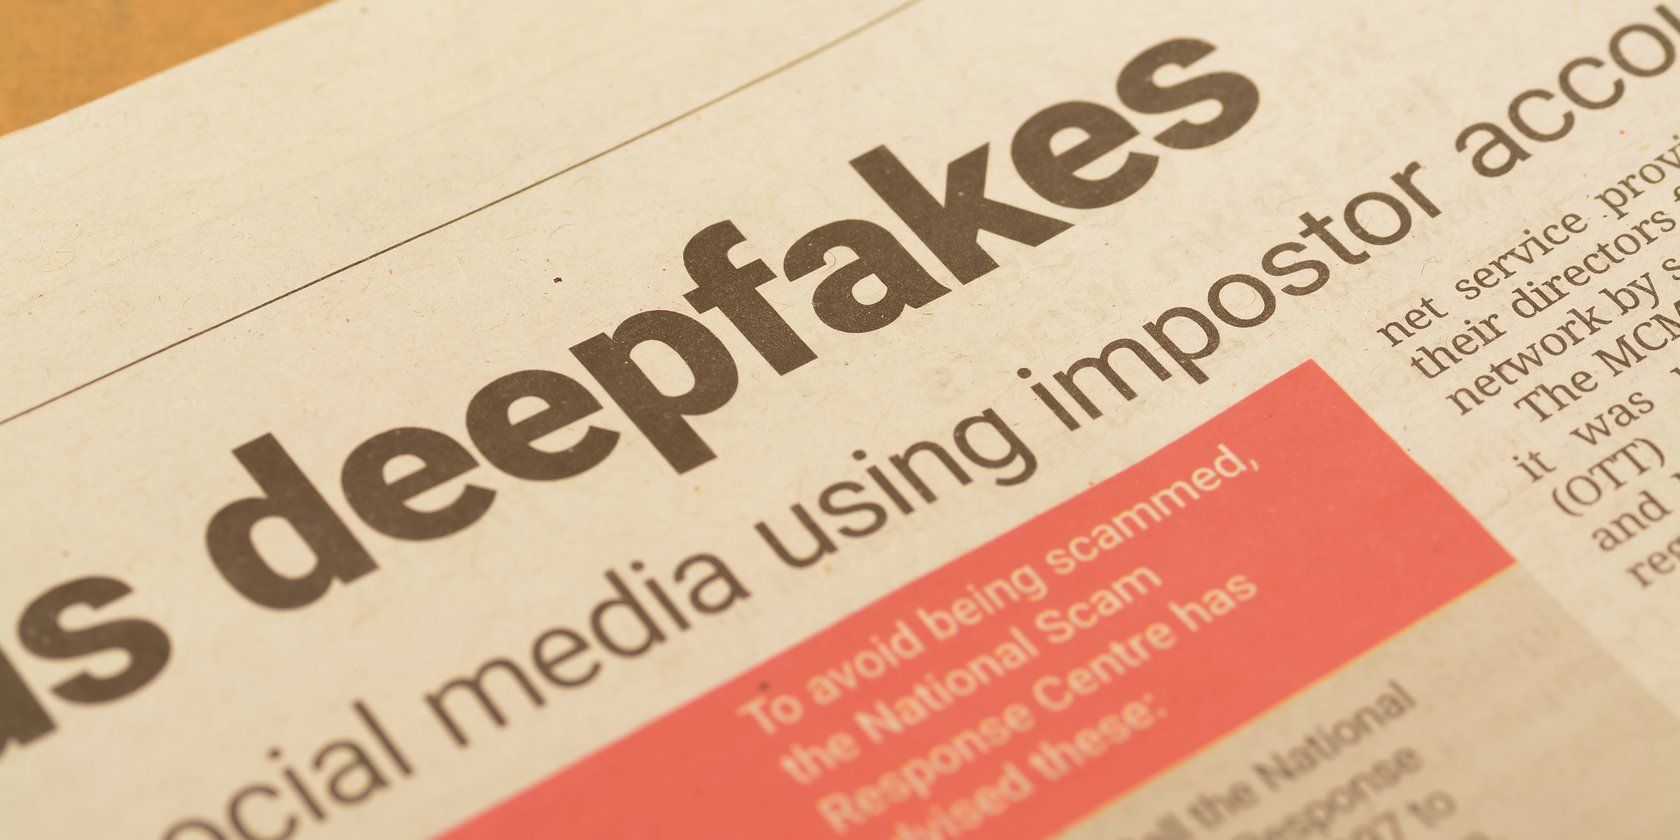 A news report about deepfakes